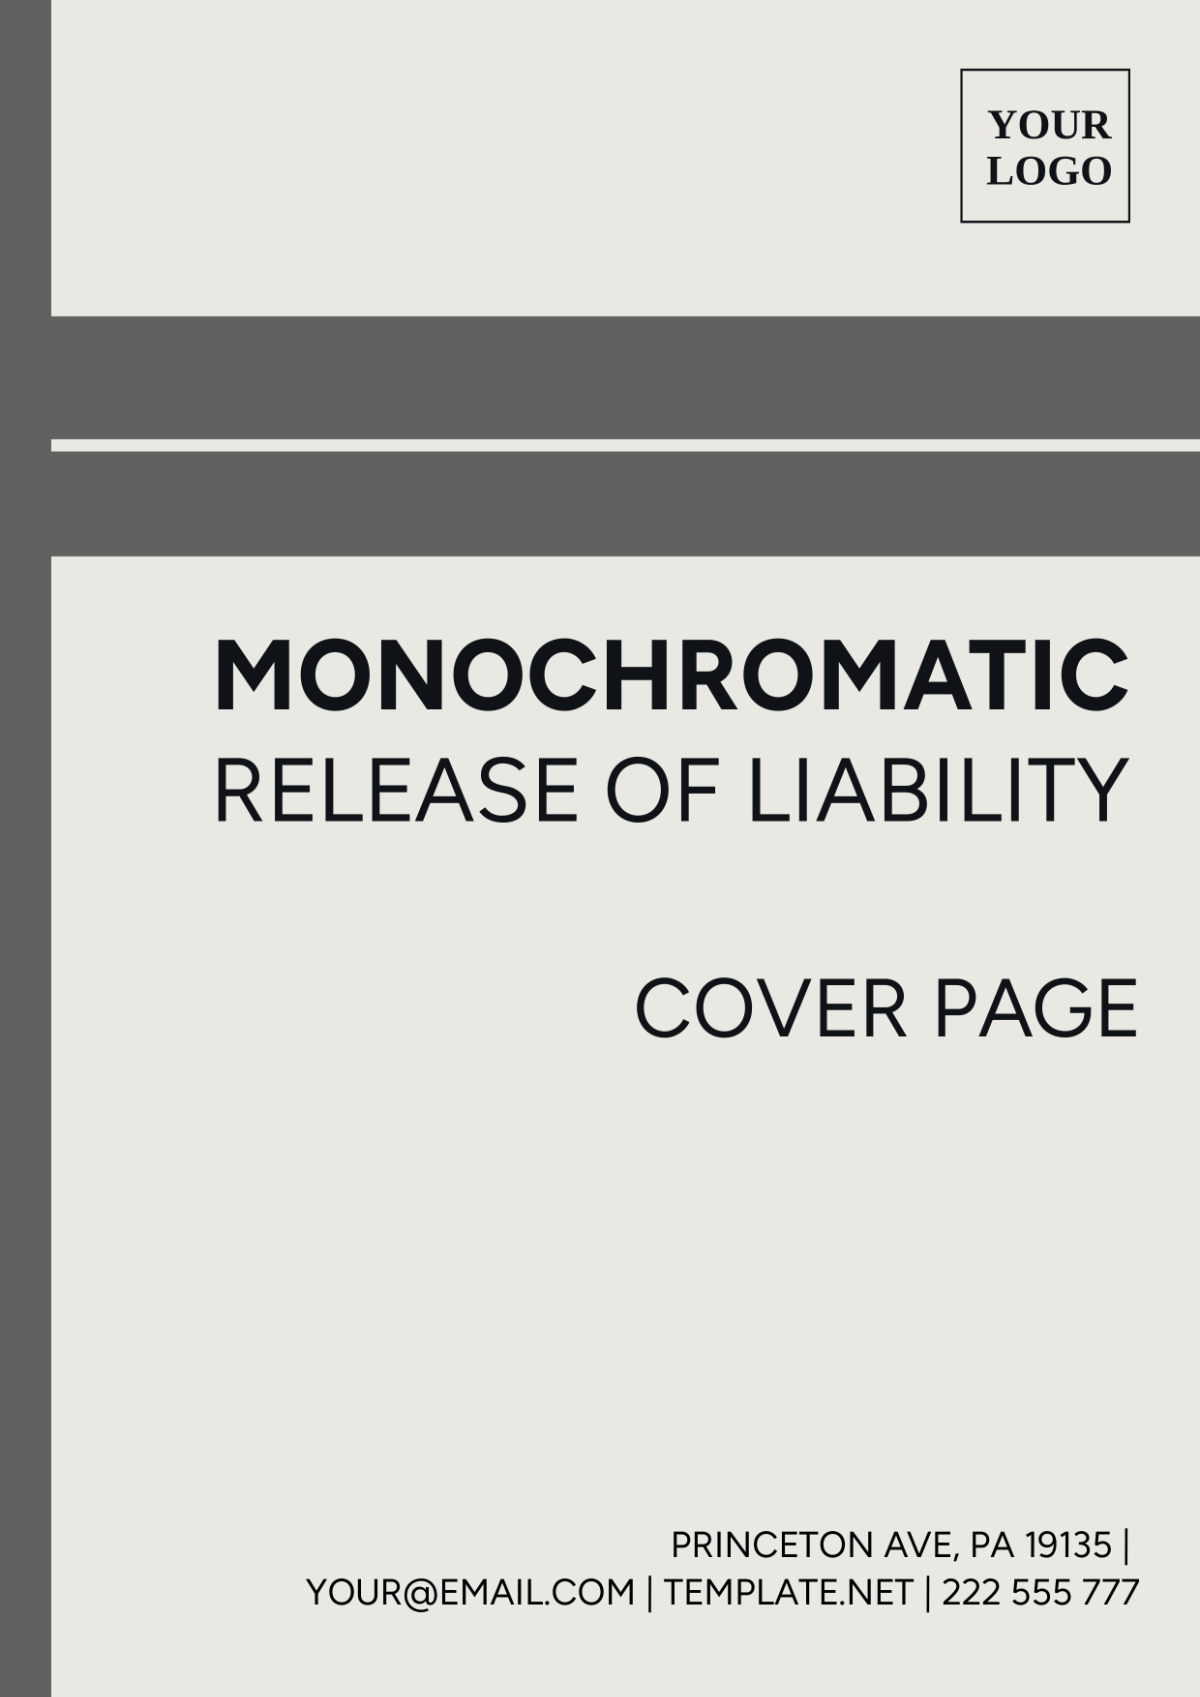 Monochromatic Release of Liability Cover Page